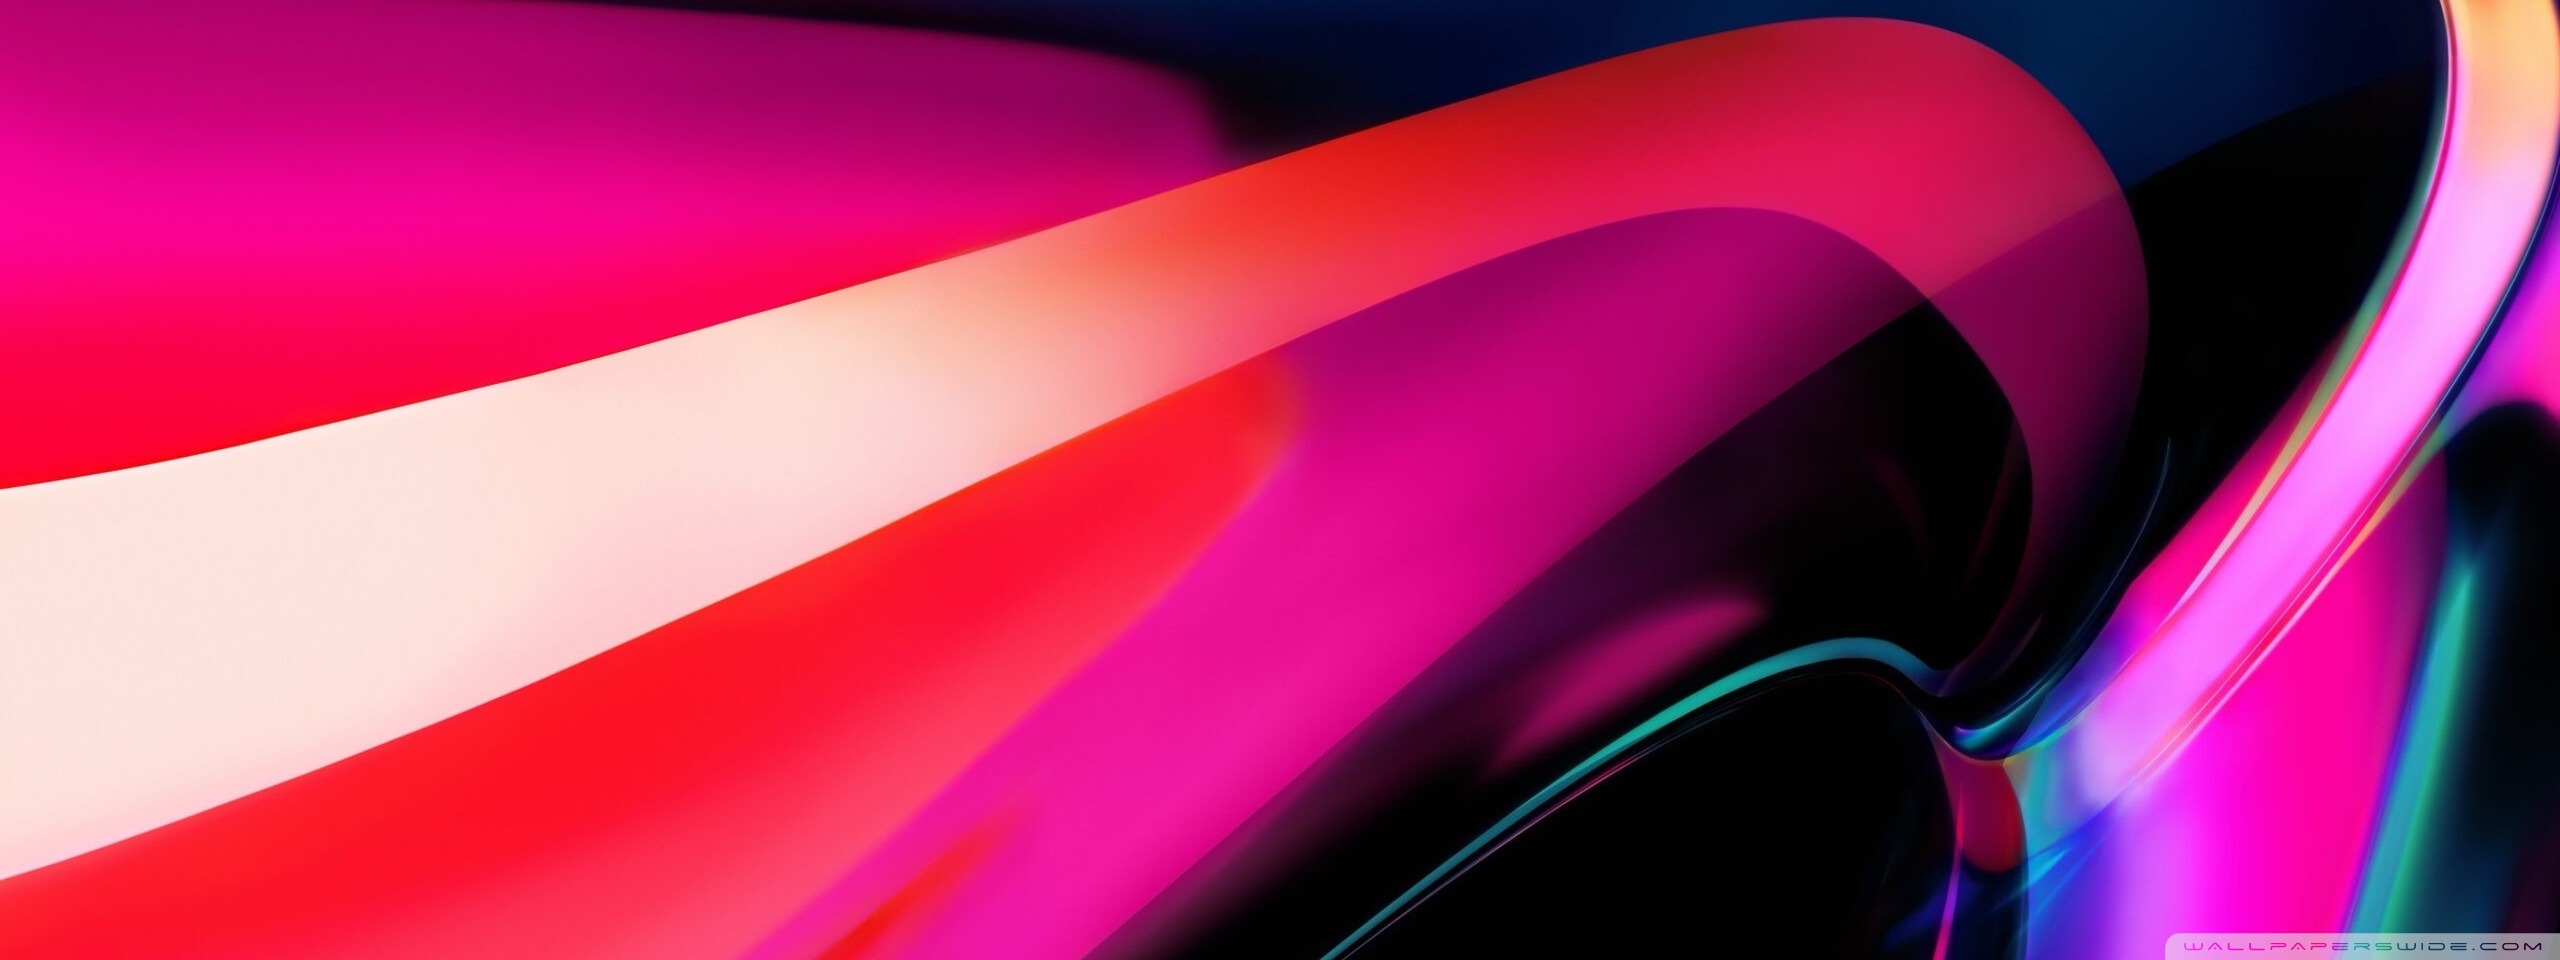 Colorful Abstract Modern Ultra HD Desktop Background Wallpaper for ...